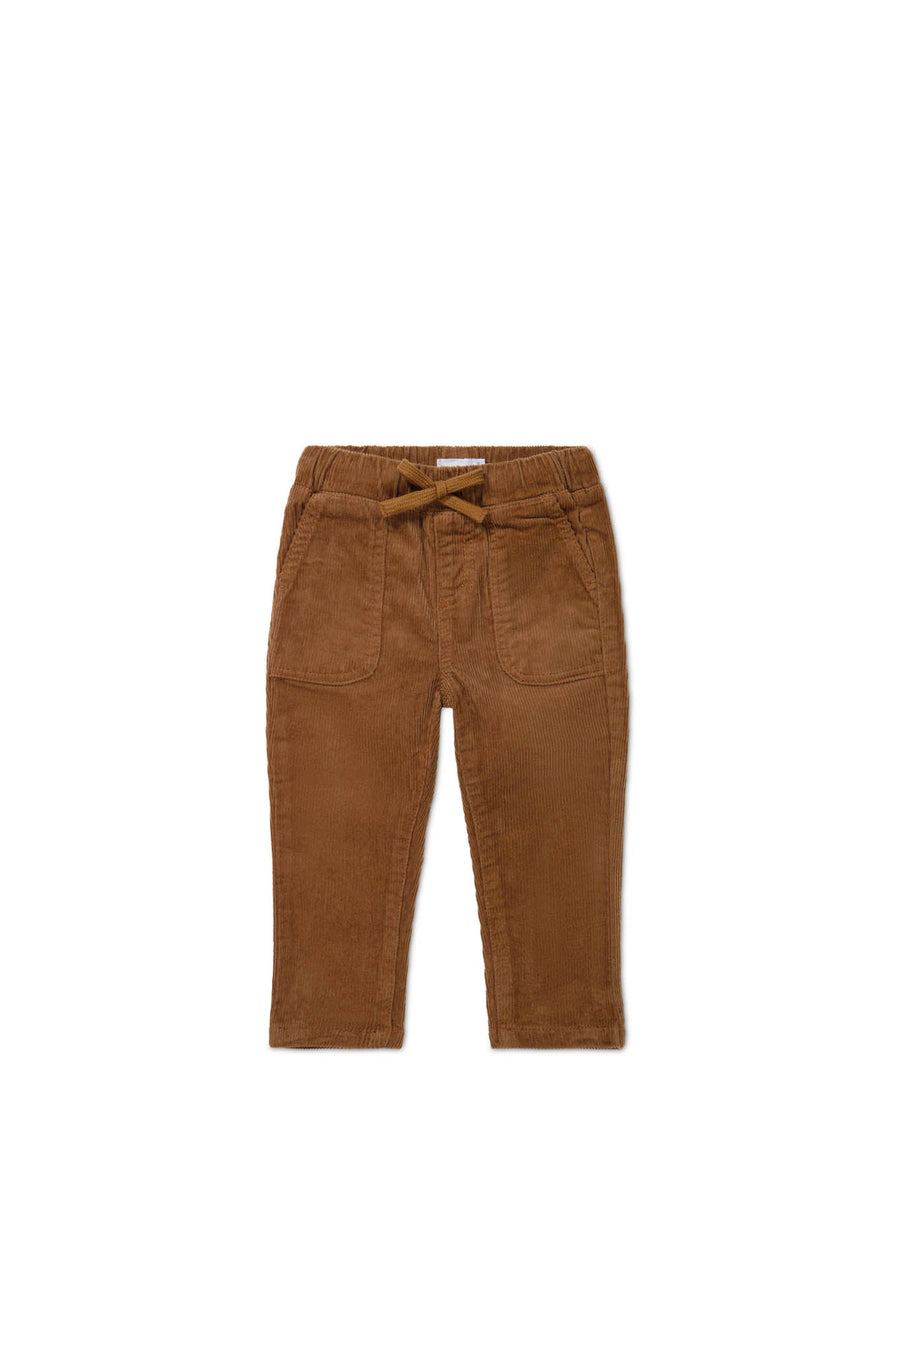 Cillian Cord Pant - Spiced Childrens Pant from Jamie Kay USA